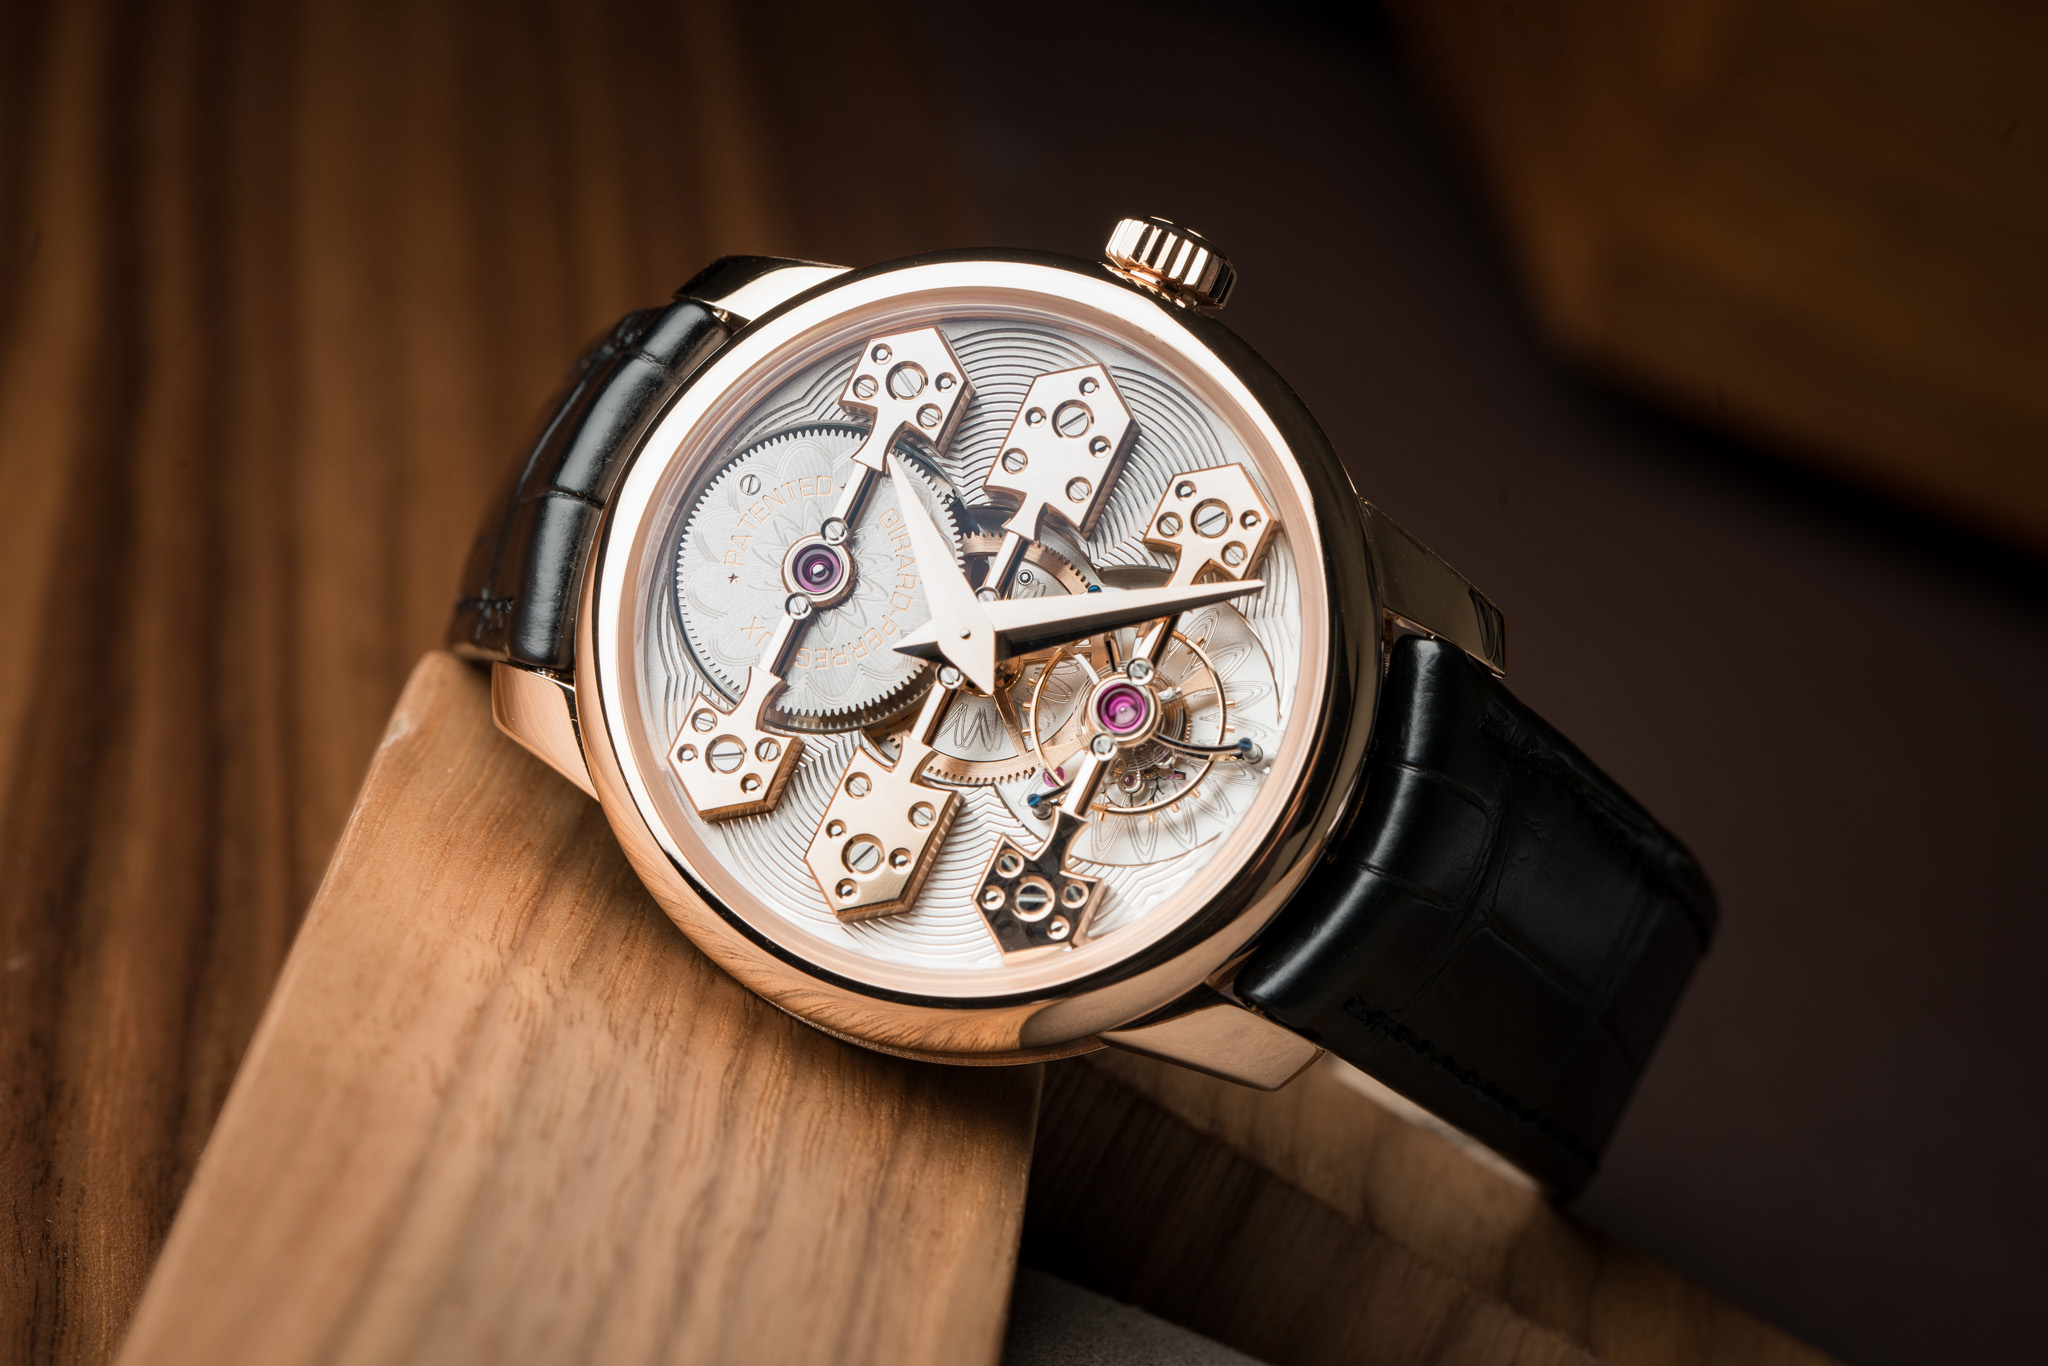 225th Anniversary Celebration Timepieces From Swiss Manufacture Girard-Perregaux